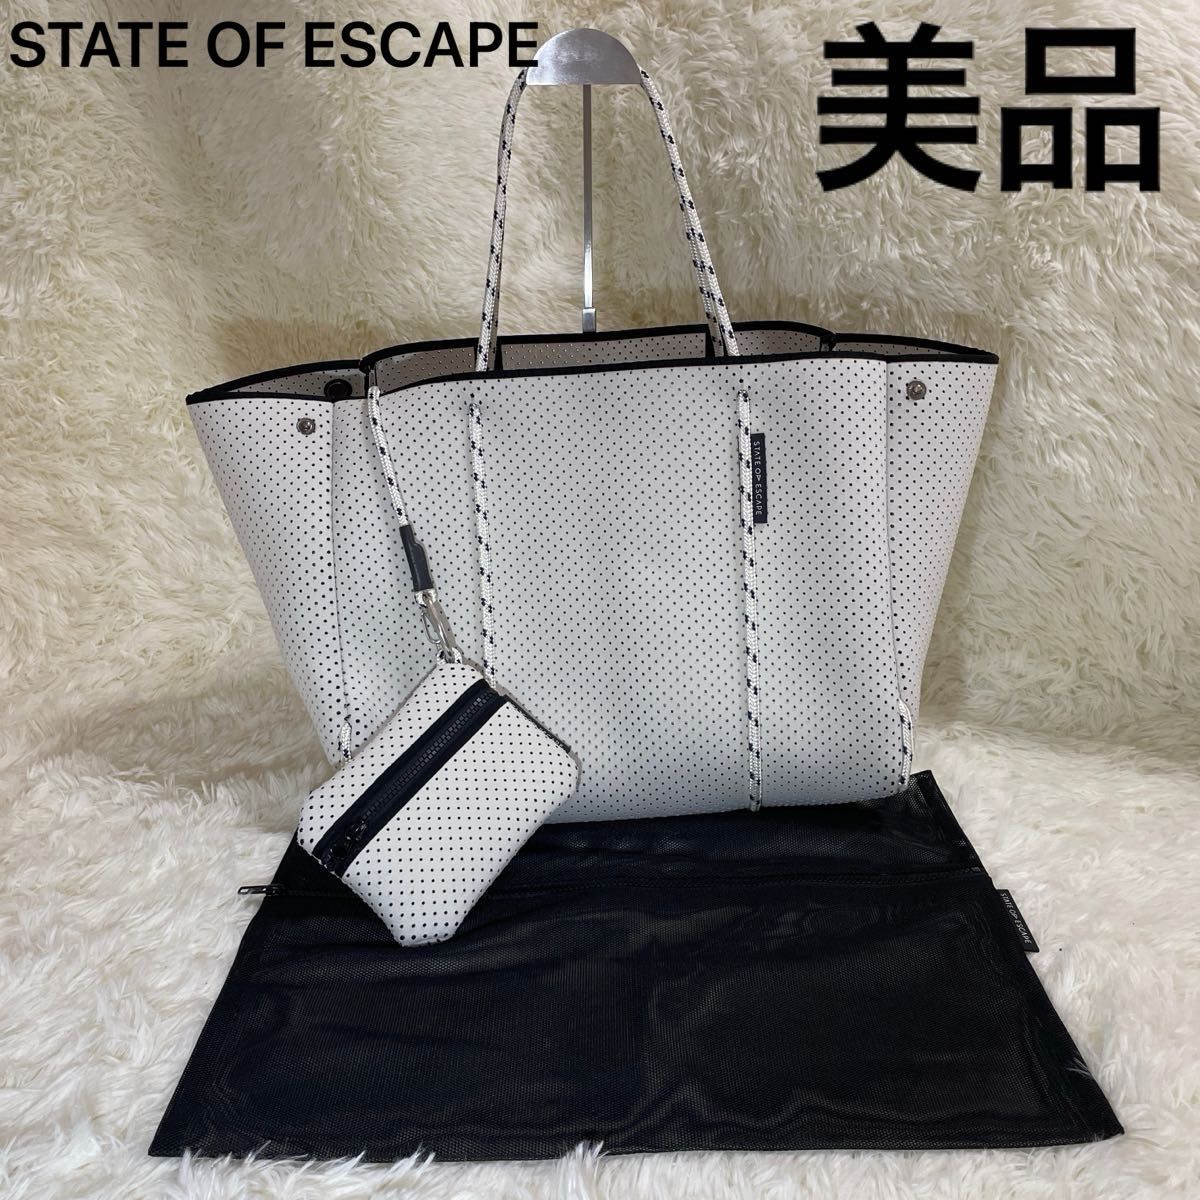 STATE OF ESCAPE ステイトオブエスケープ ネオプレン バッグ ポーチ付 ロンハーマン